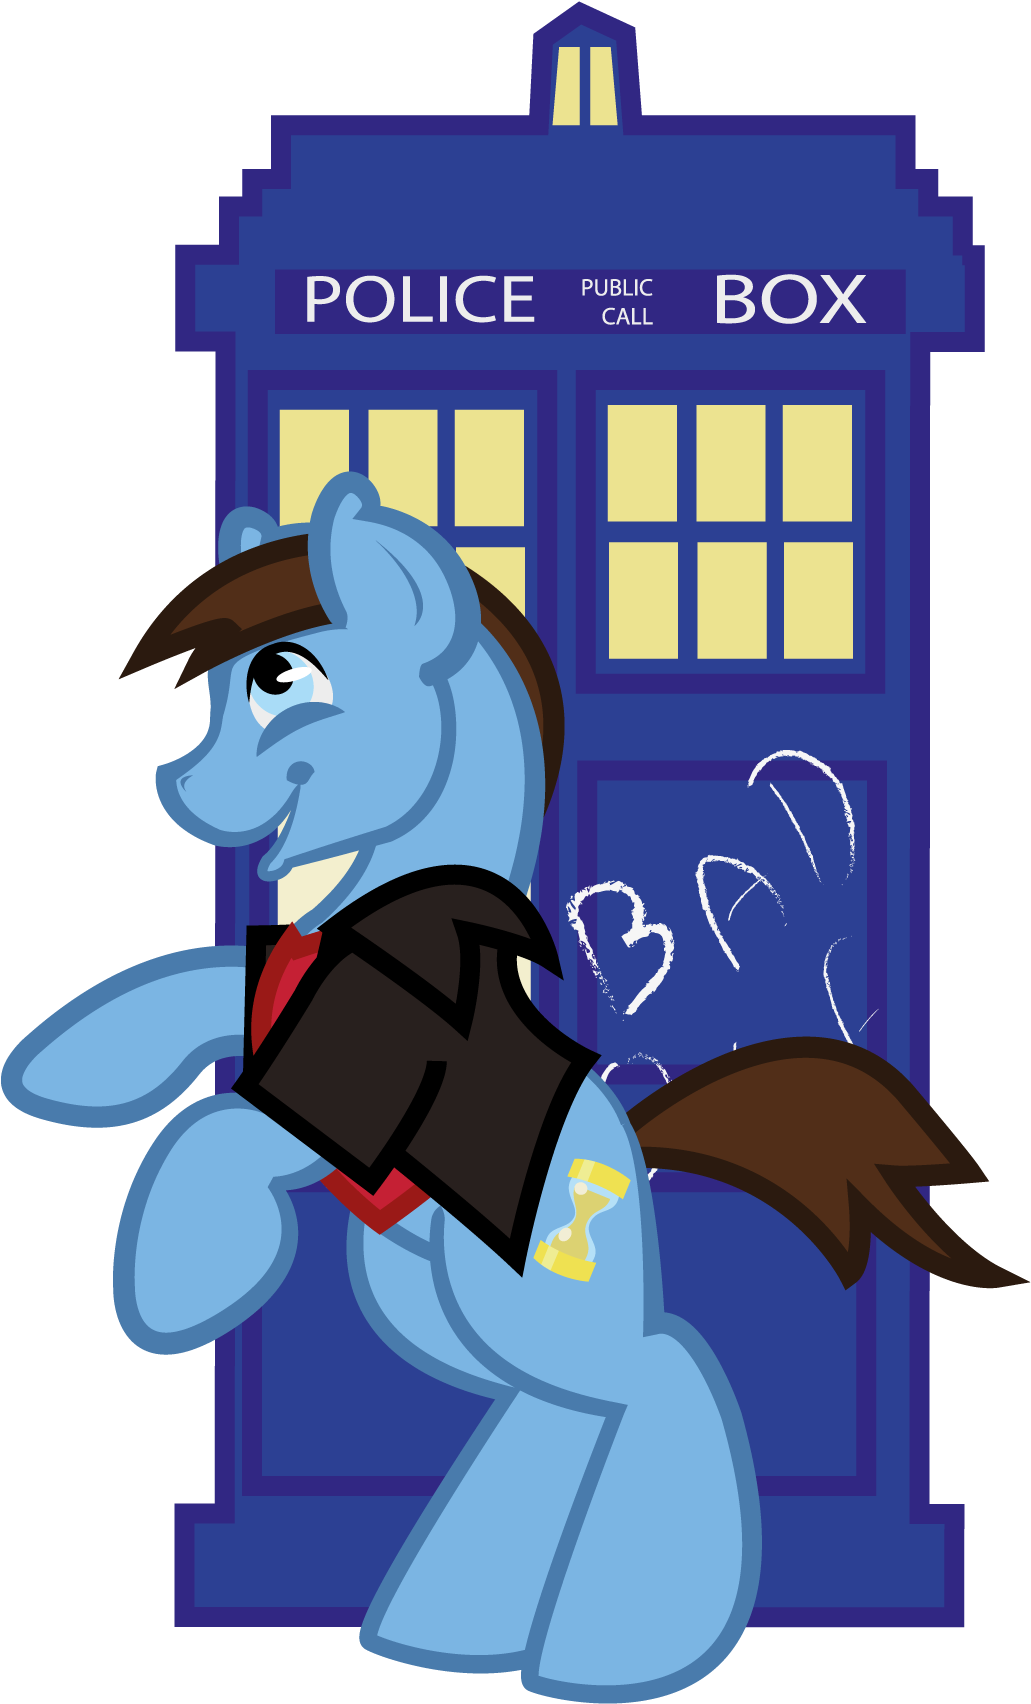 Mad A Version With Bad Wolf On The Tardis, Just Cause - Mad A Version With Bad Wolf On The Tardis, Just Cause (2304x1728)